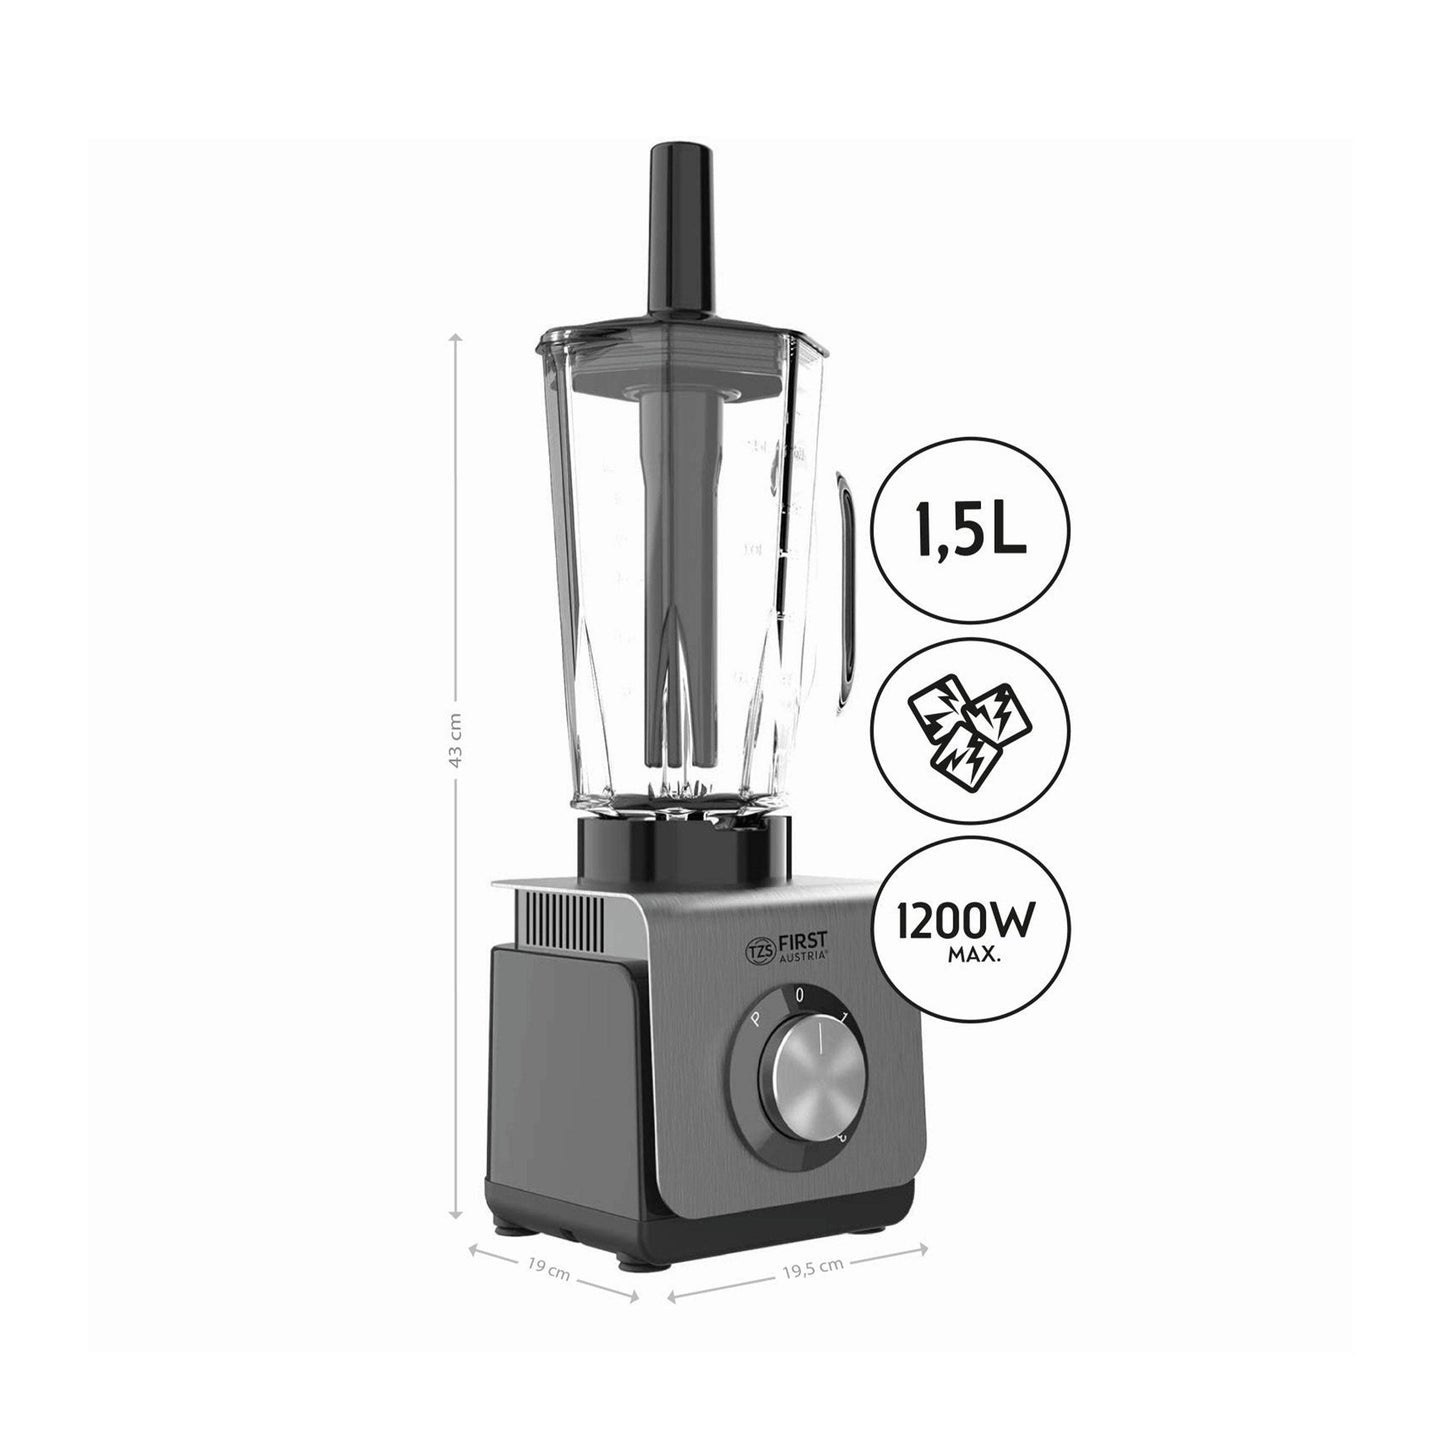 TZS First Austria Blender Mixer 1200 W, Powerful Smoothie Blender with 1.5 L Detachable Glass Bowl, Multifunction Mixer 6 Blades, 3 Speeds, Ice Function, Gray and Black-Royal Brands Co-